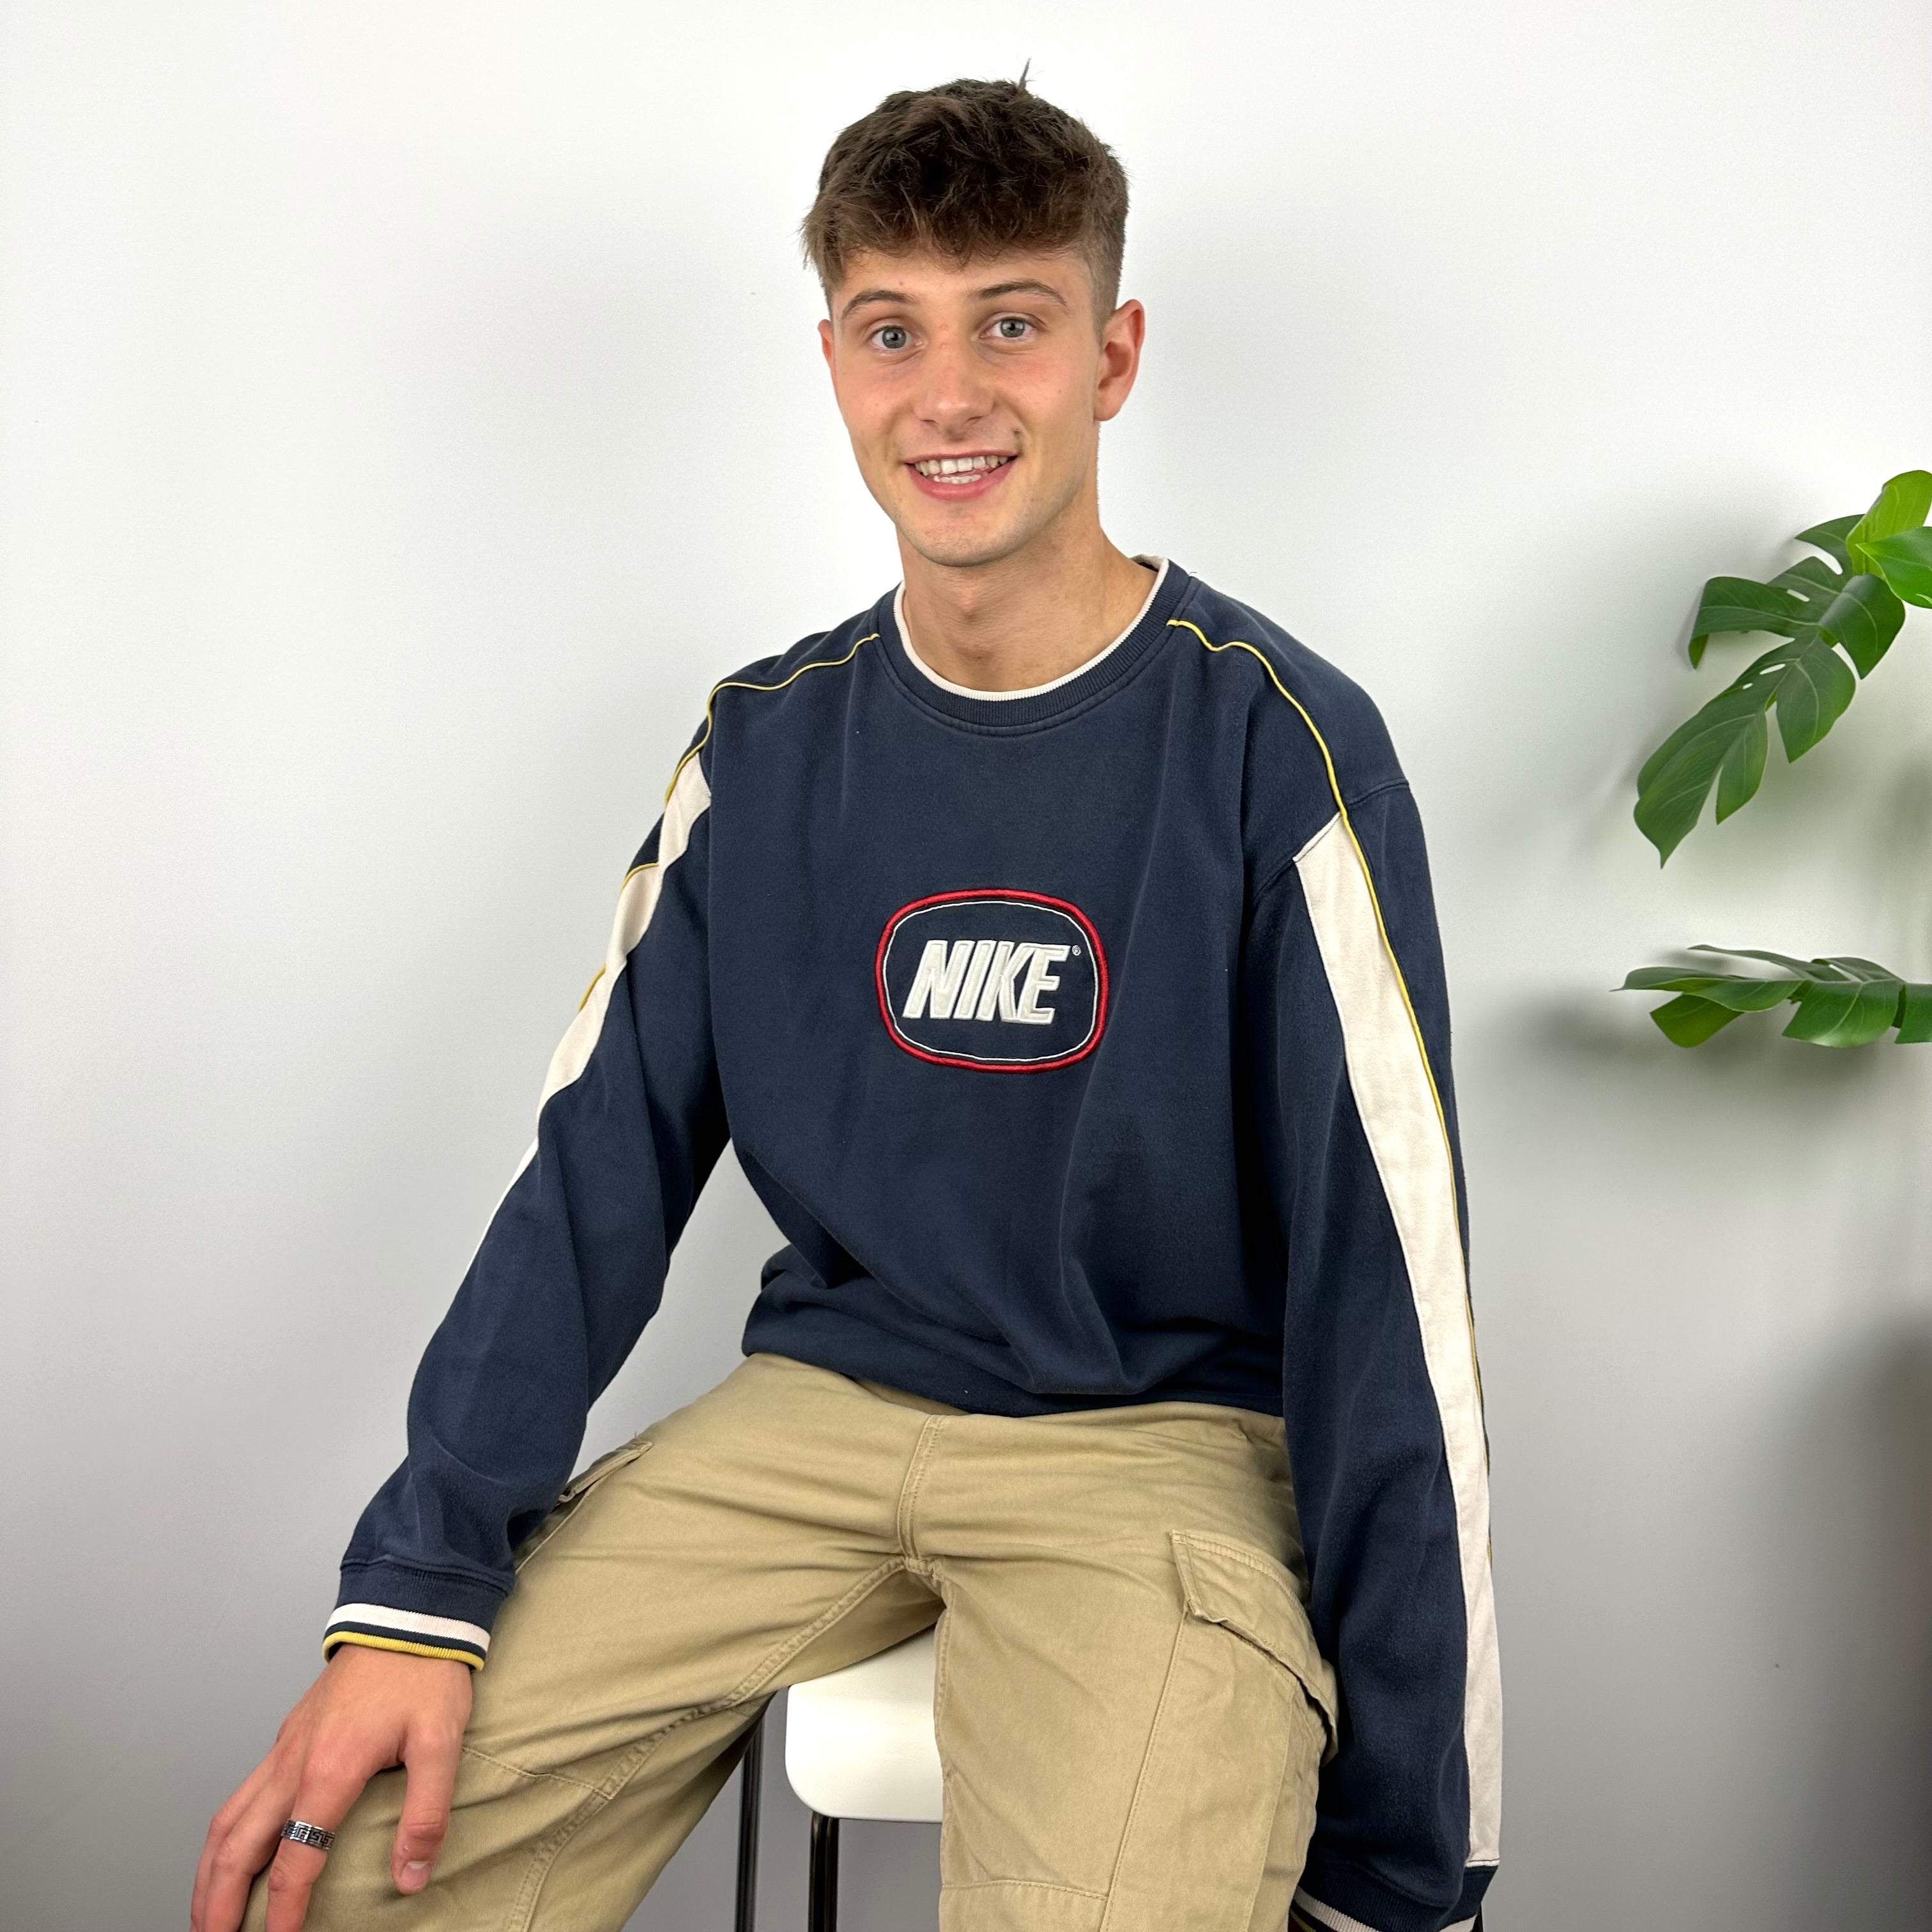 Nike RARE Navy Embroidered Spell Out Sweatshirt (XXL)